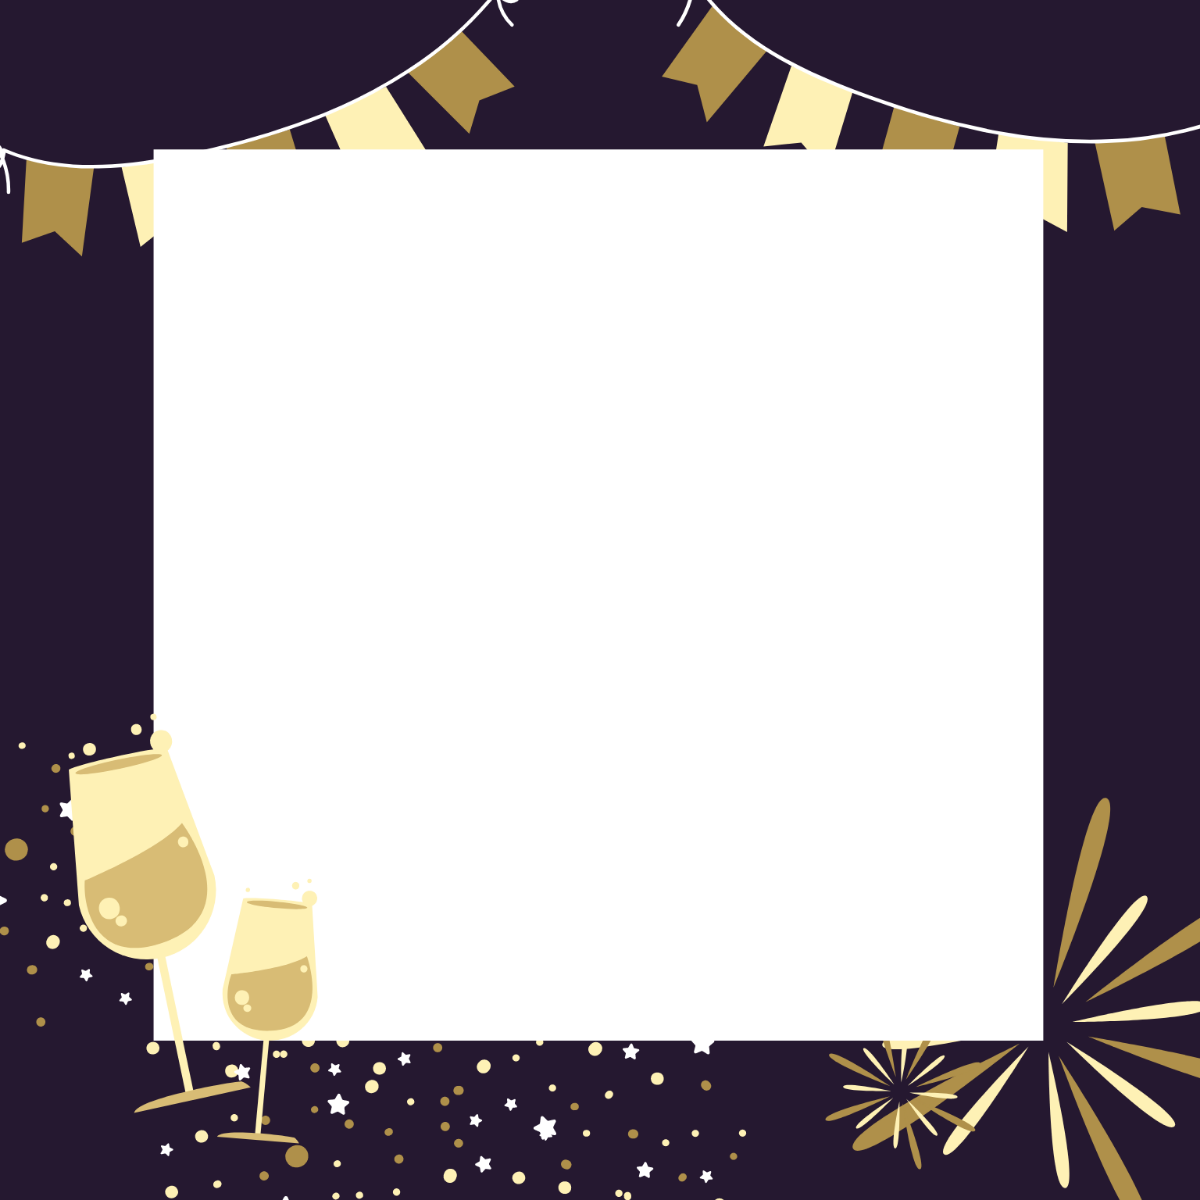 New Year's Eve Border Vector Template